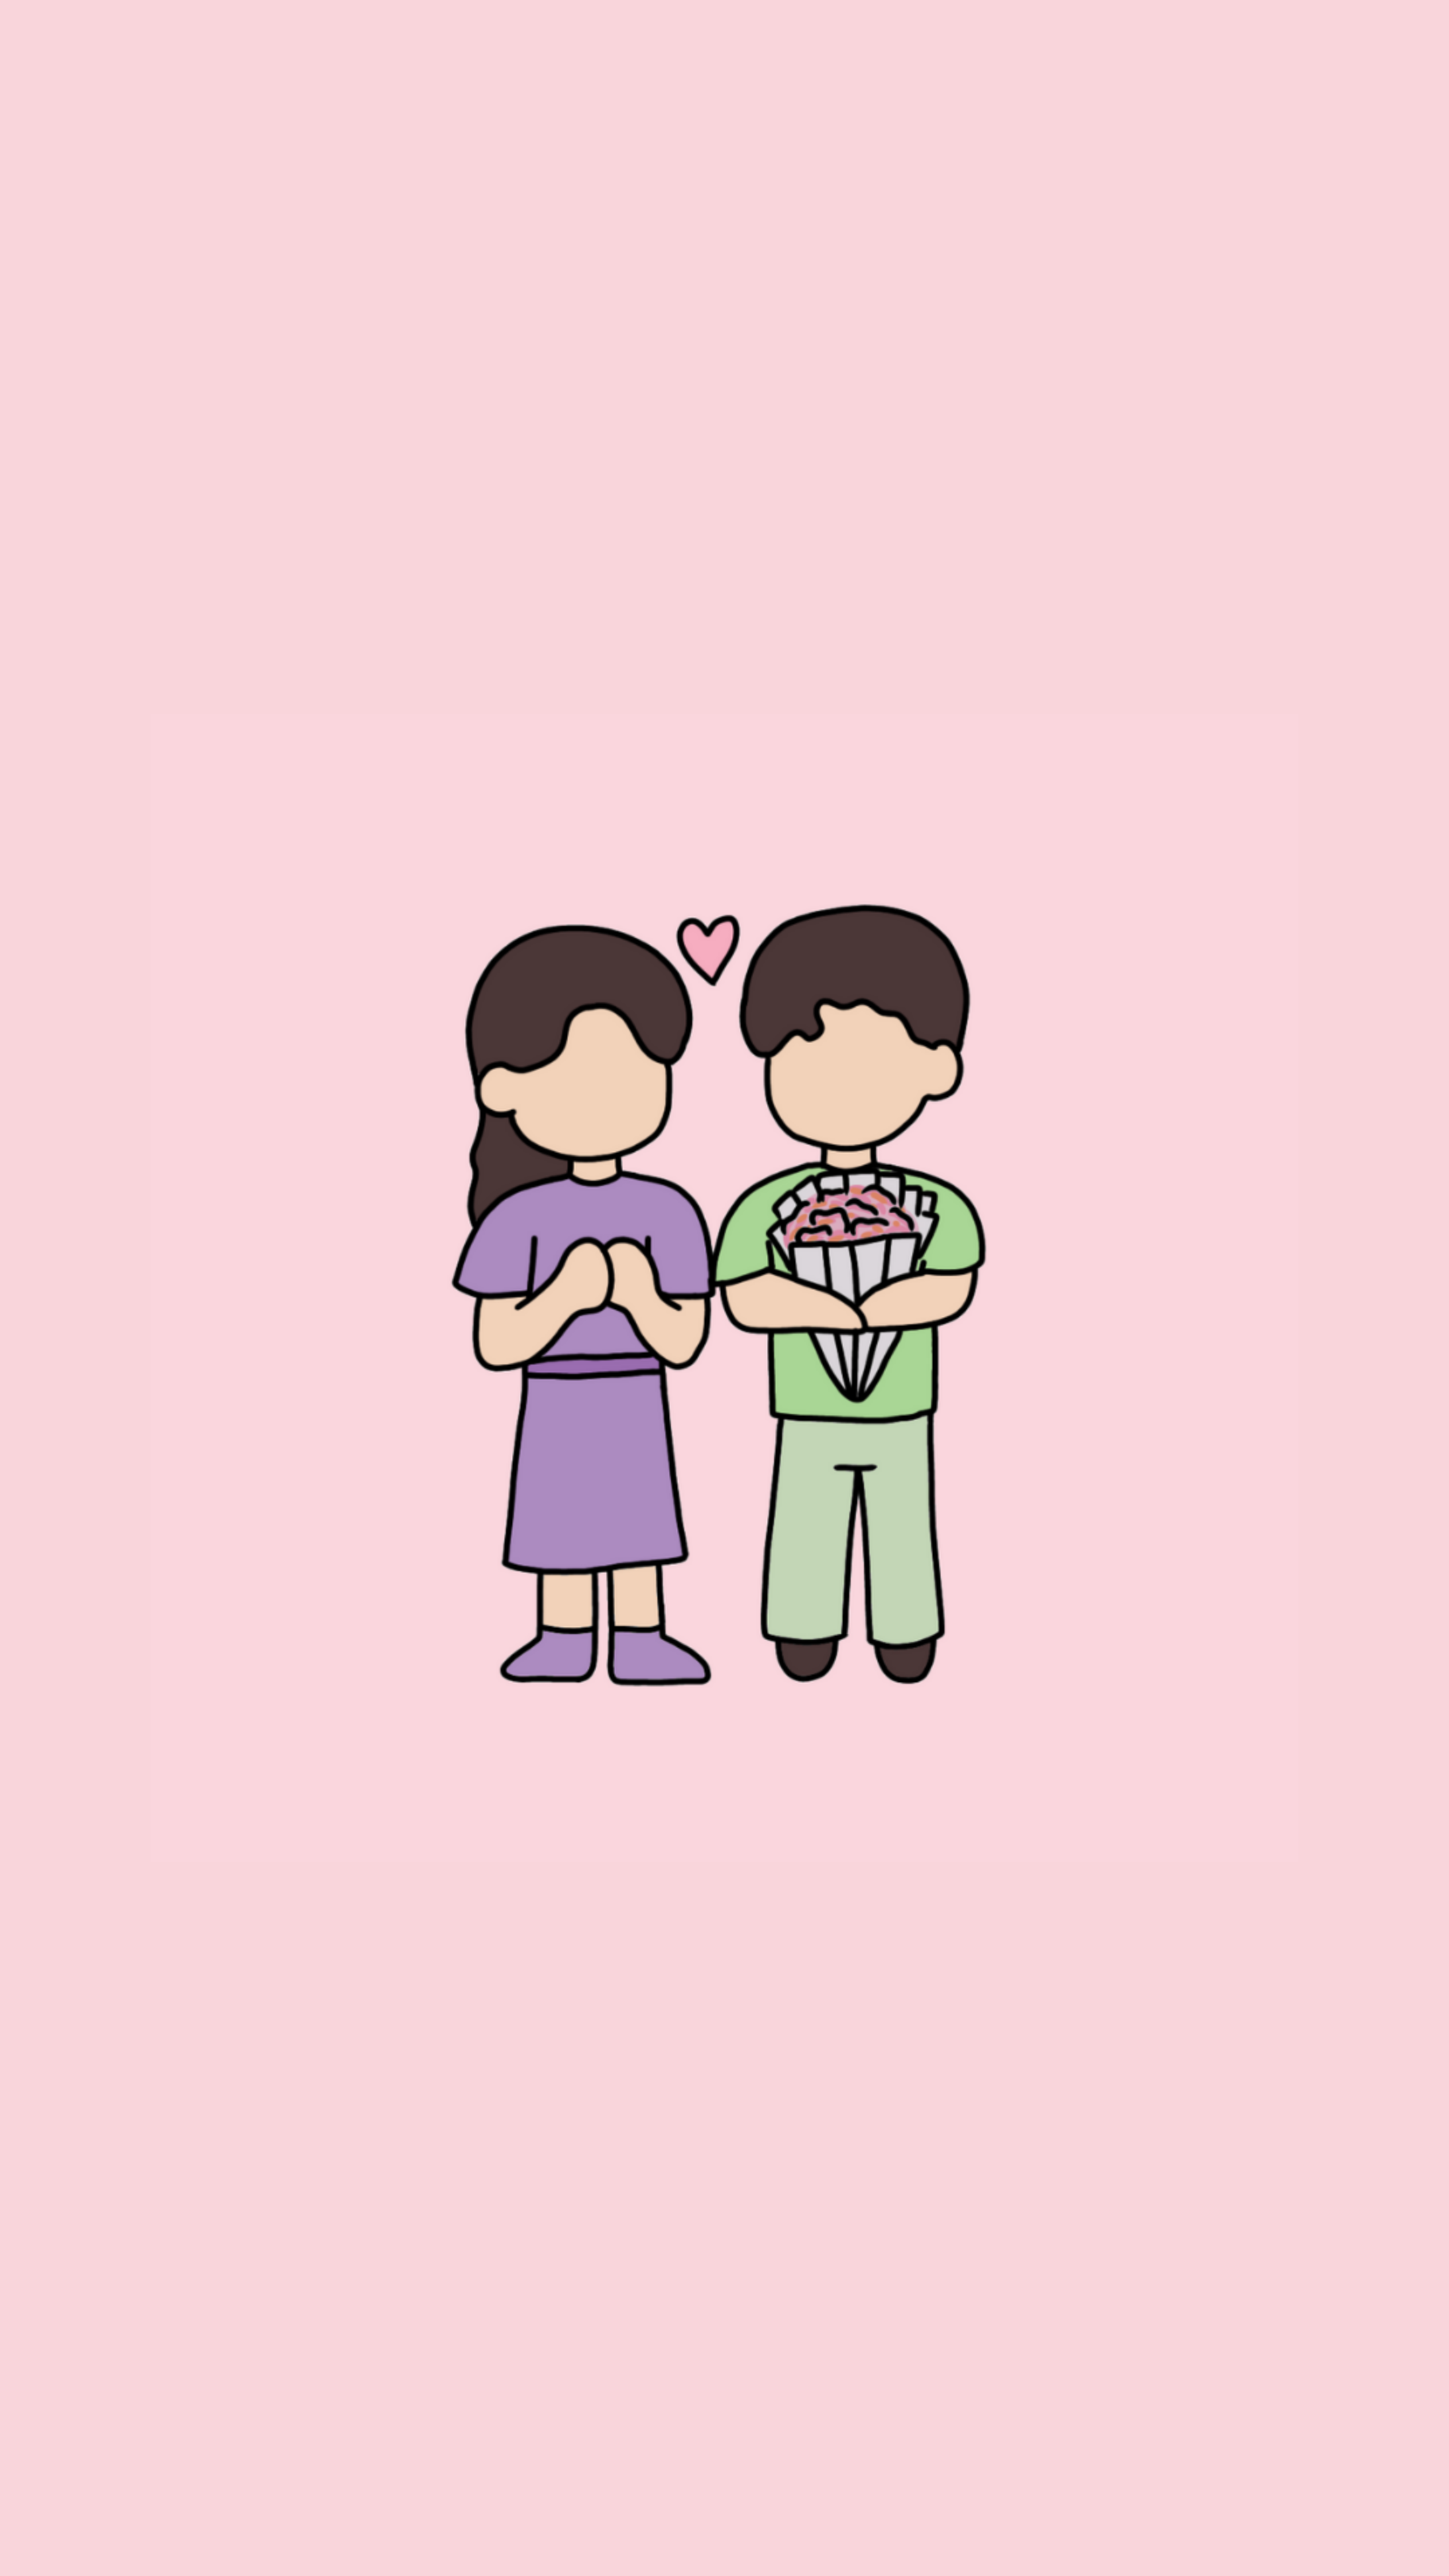 ivoci - Free Download: Cute Couple Illustration Phone Wallpapers - 7